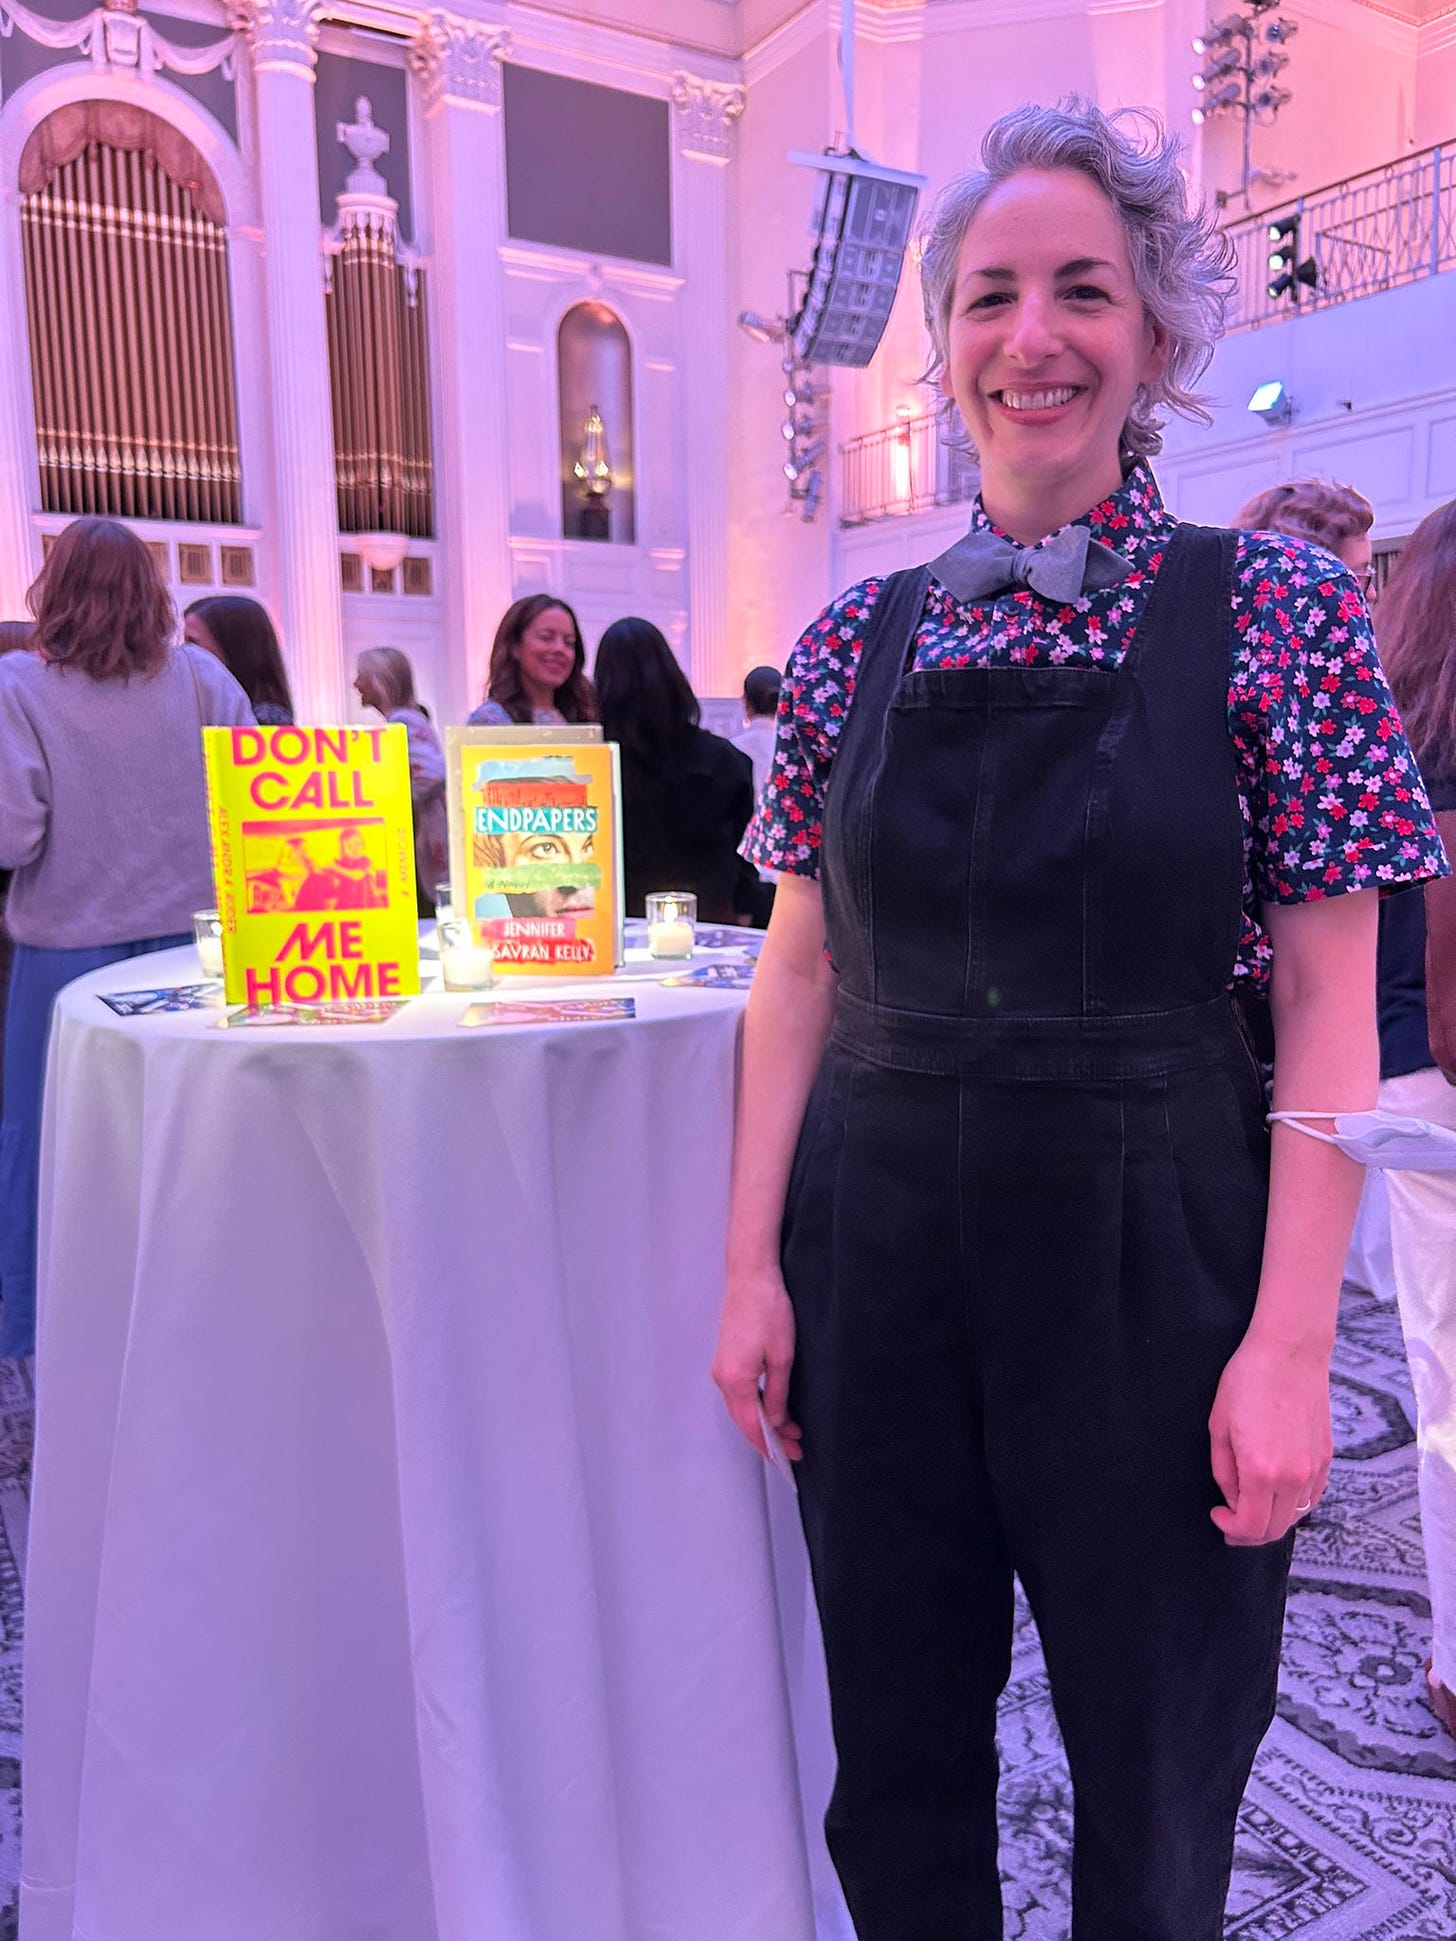 I'm standing next to a small round table that has two books standing up on it. One of them is my novel Endpapers. I'm wearing a jumpsuit with a shortsleeve shirt and bowtie, and I'm smiling.